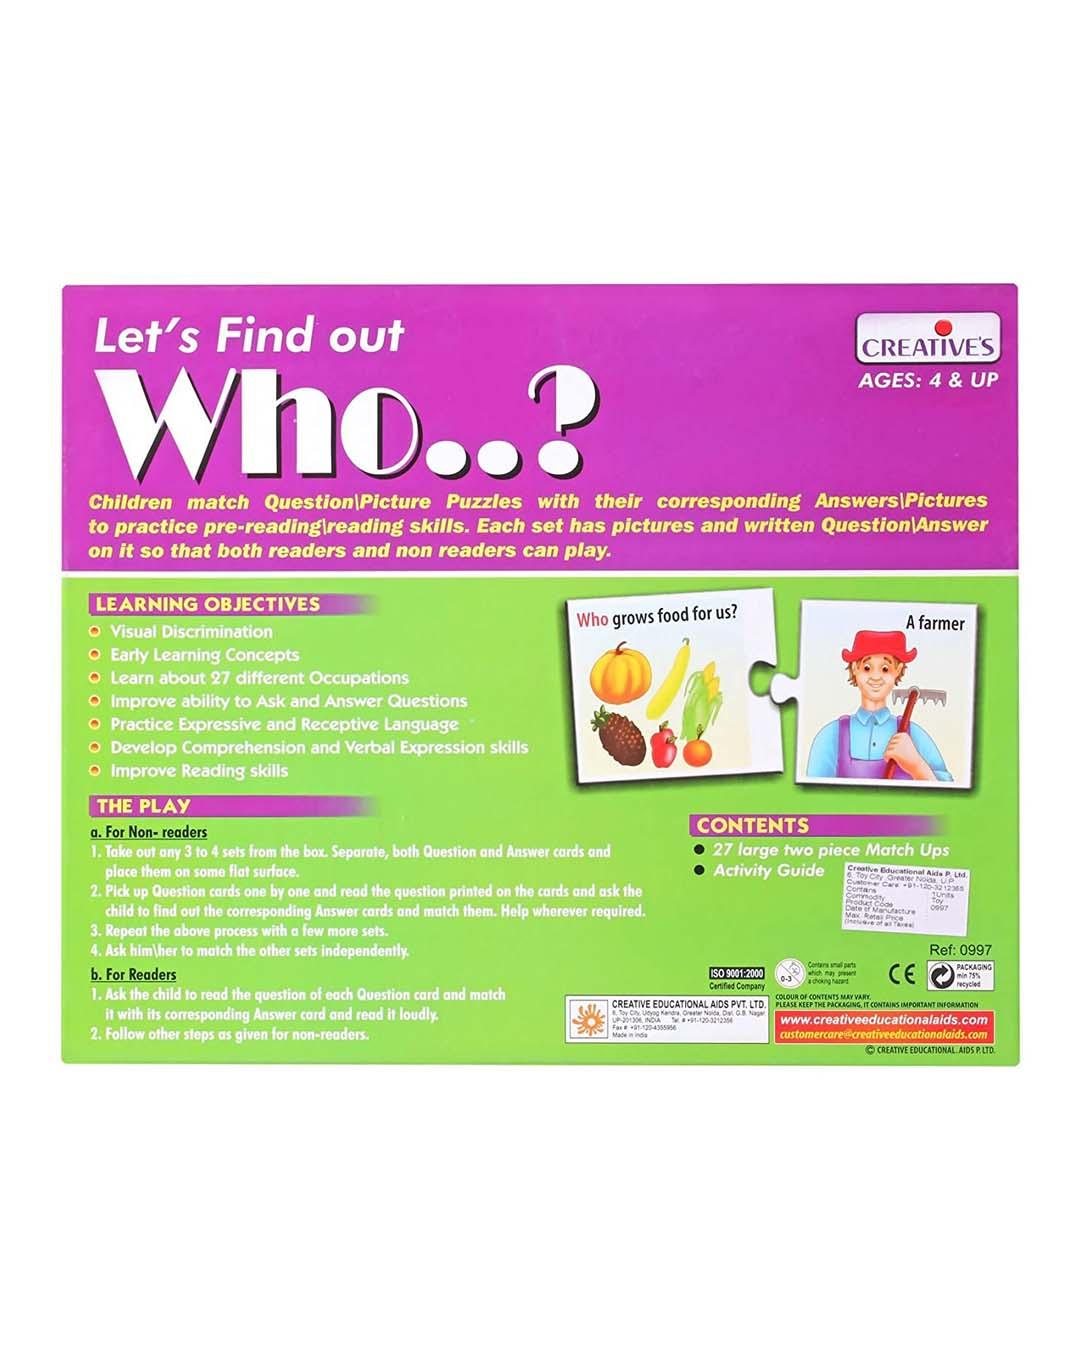 Creative Let's Find Out- Who, (27 Set of self-correcting Match ups ) for Kids - For Child Age 4 & Up - MARKET 99